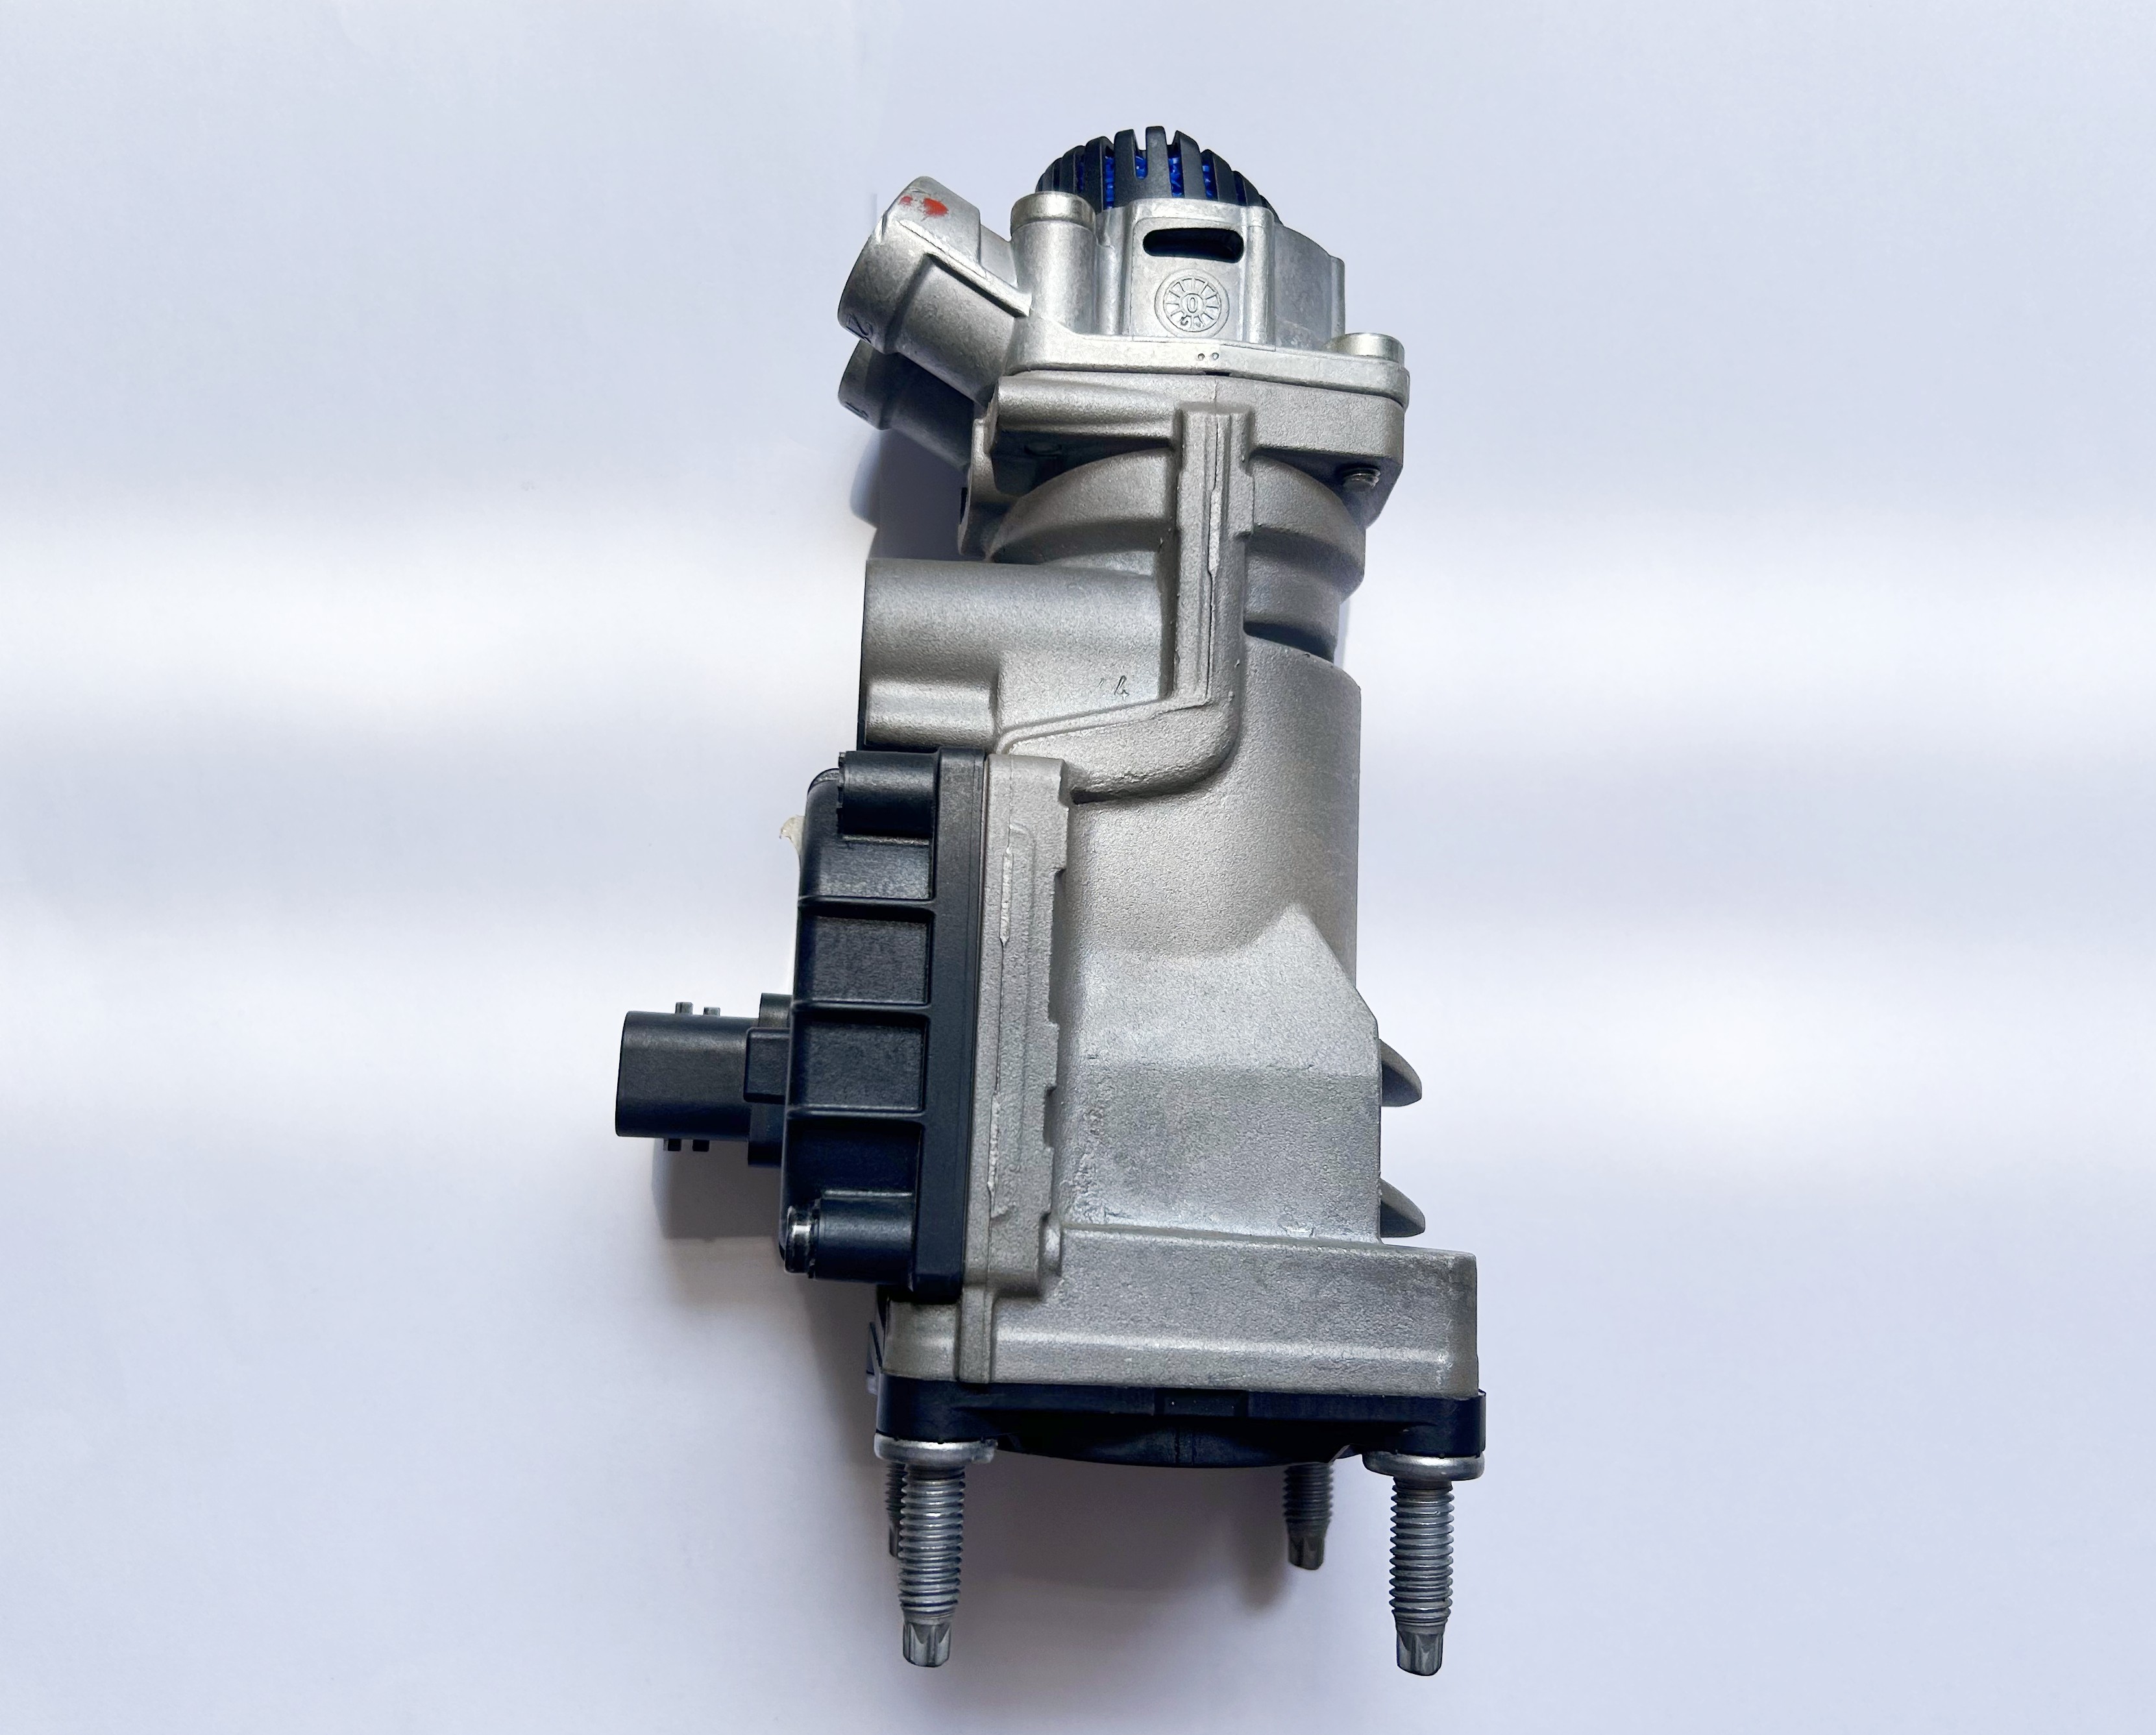 What are the working principles and possible faults of Vehicle Air Brake Foot Brake Valve?